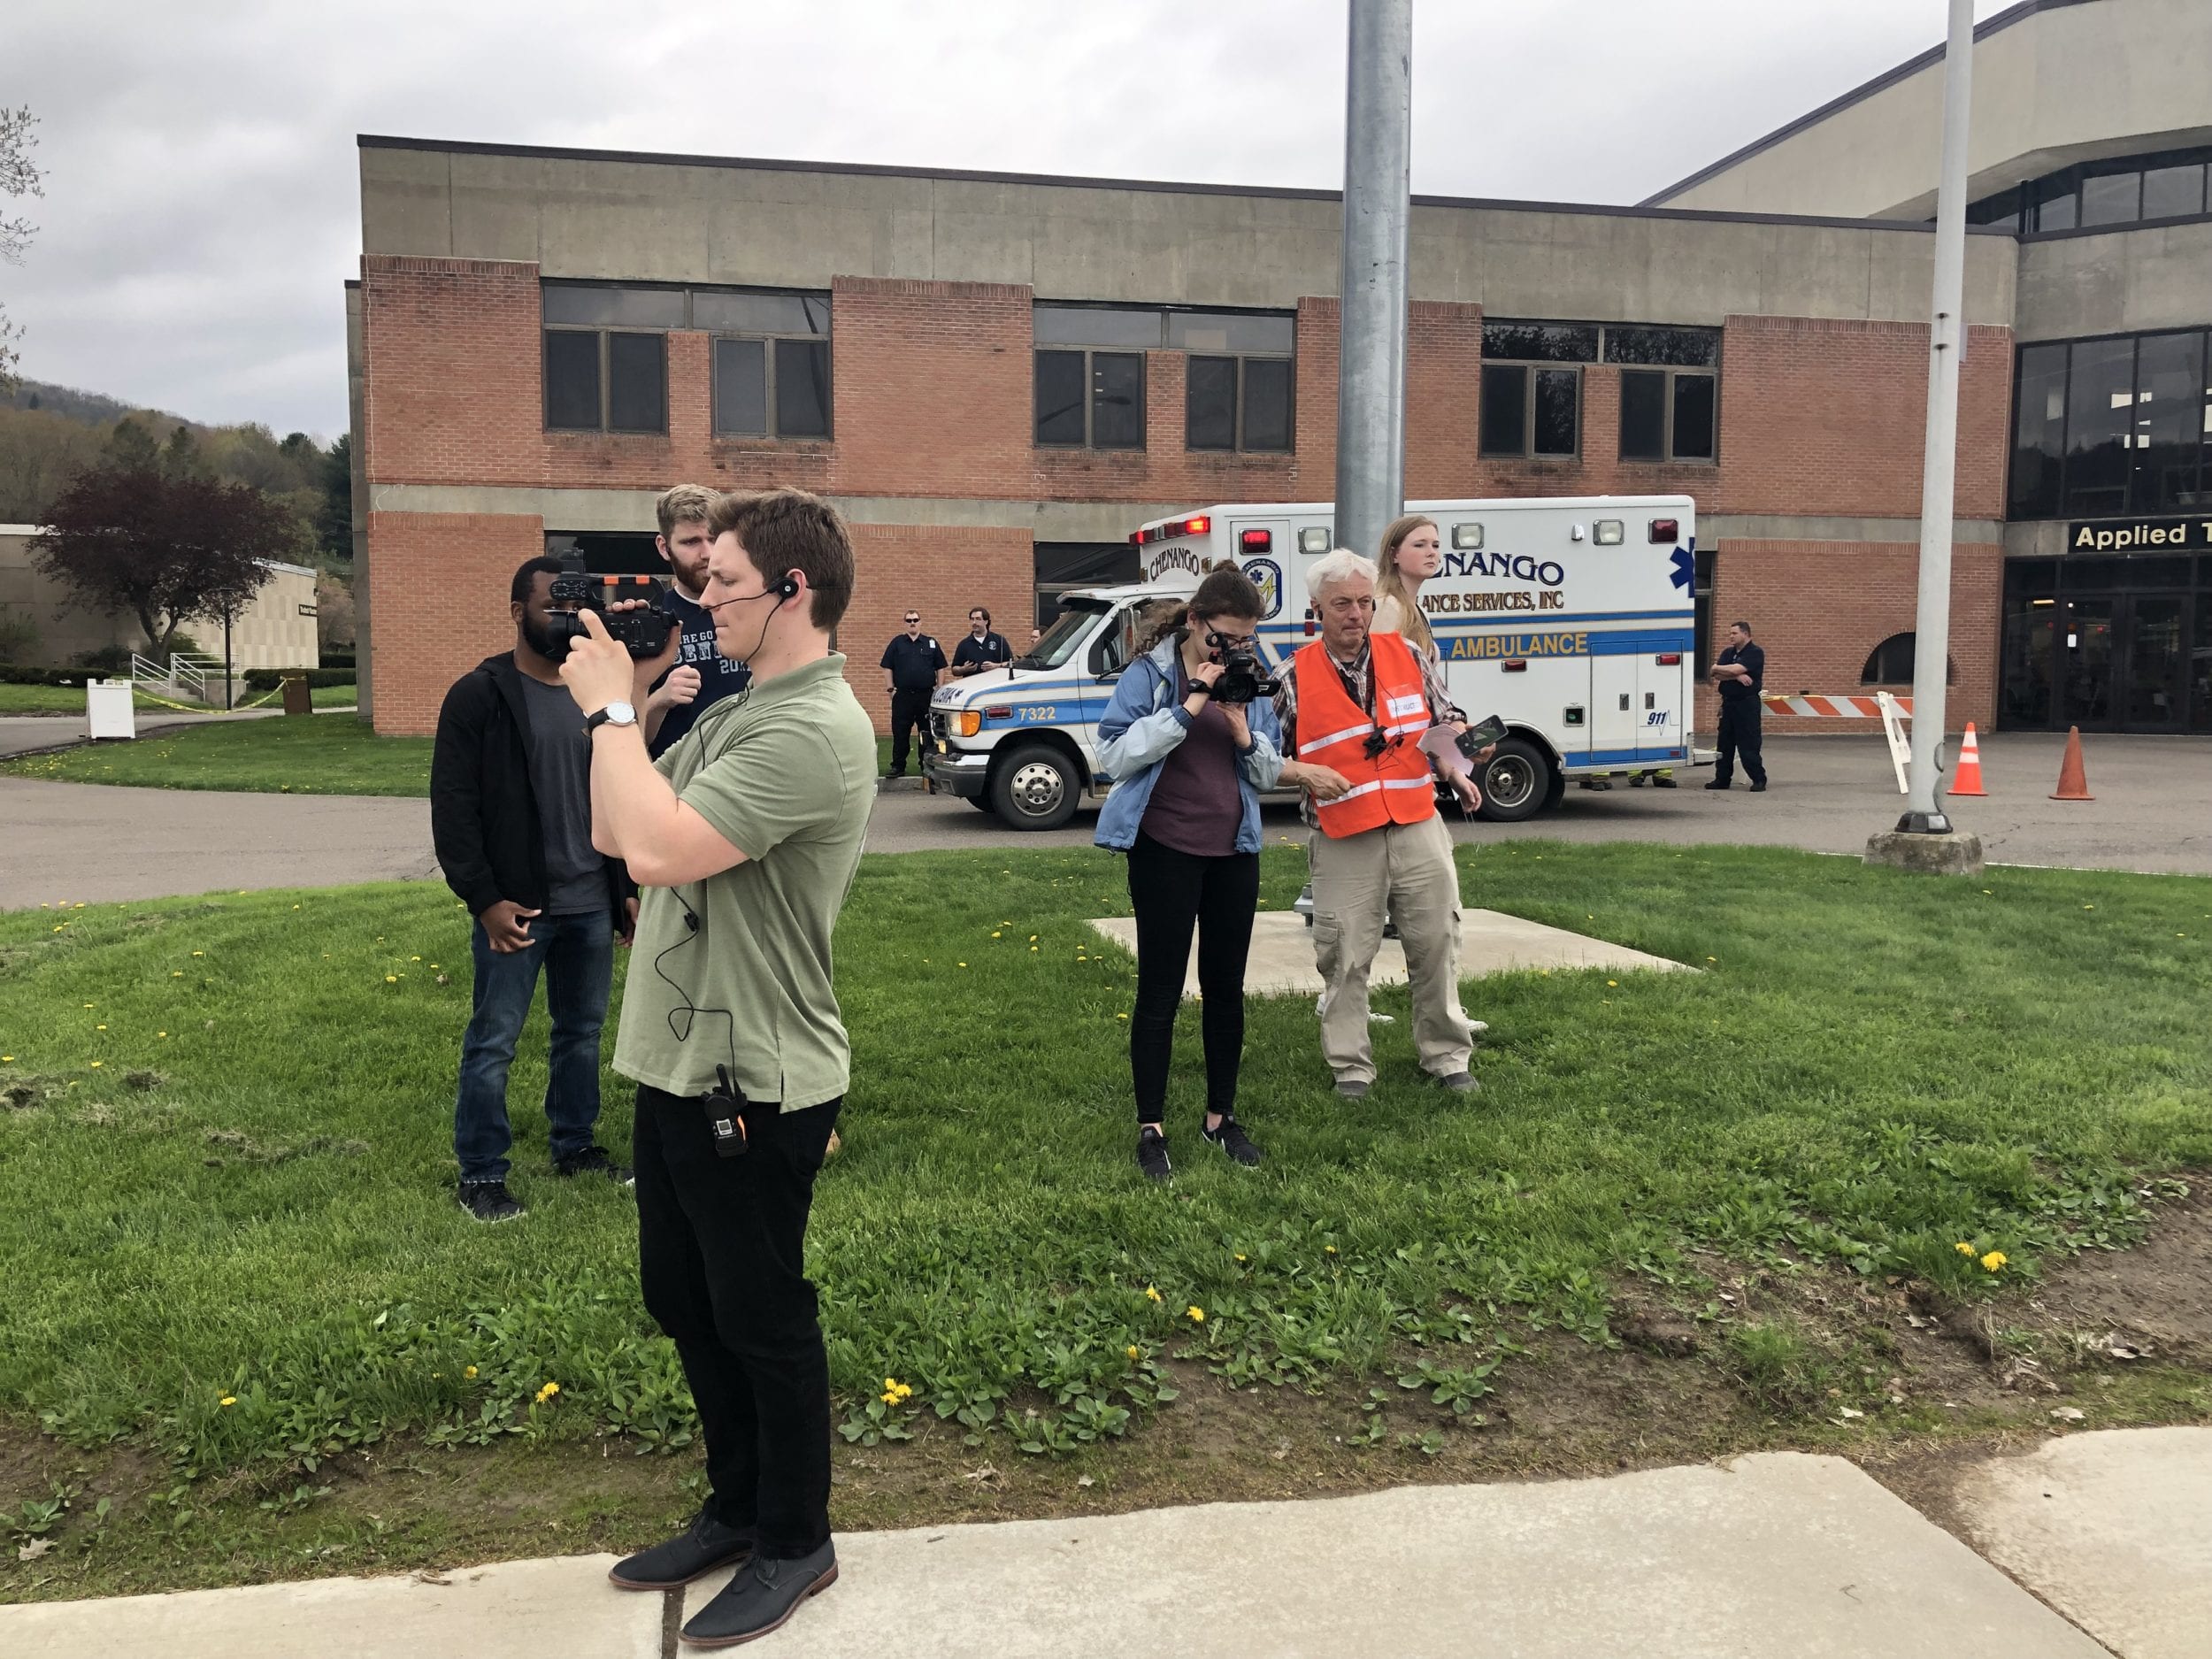 Student journalists gather footage during the Mock Disaster